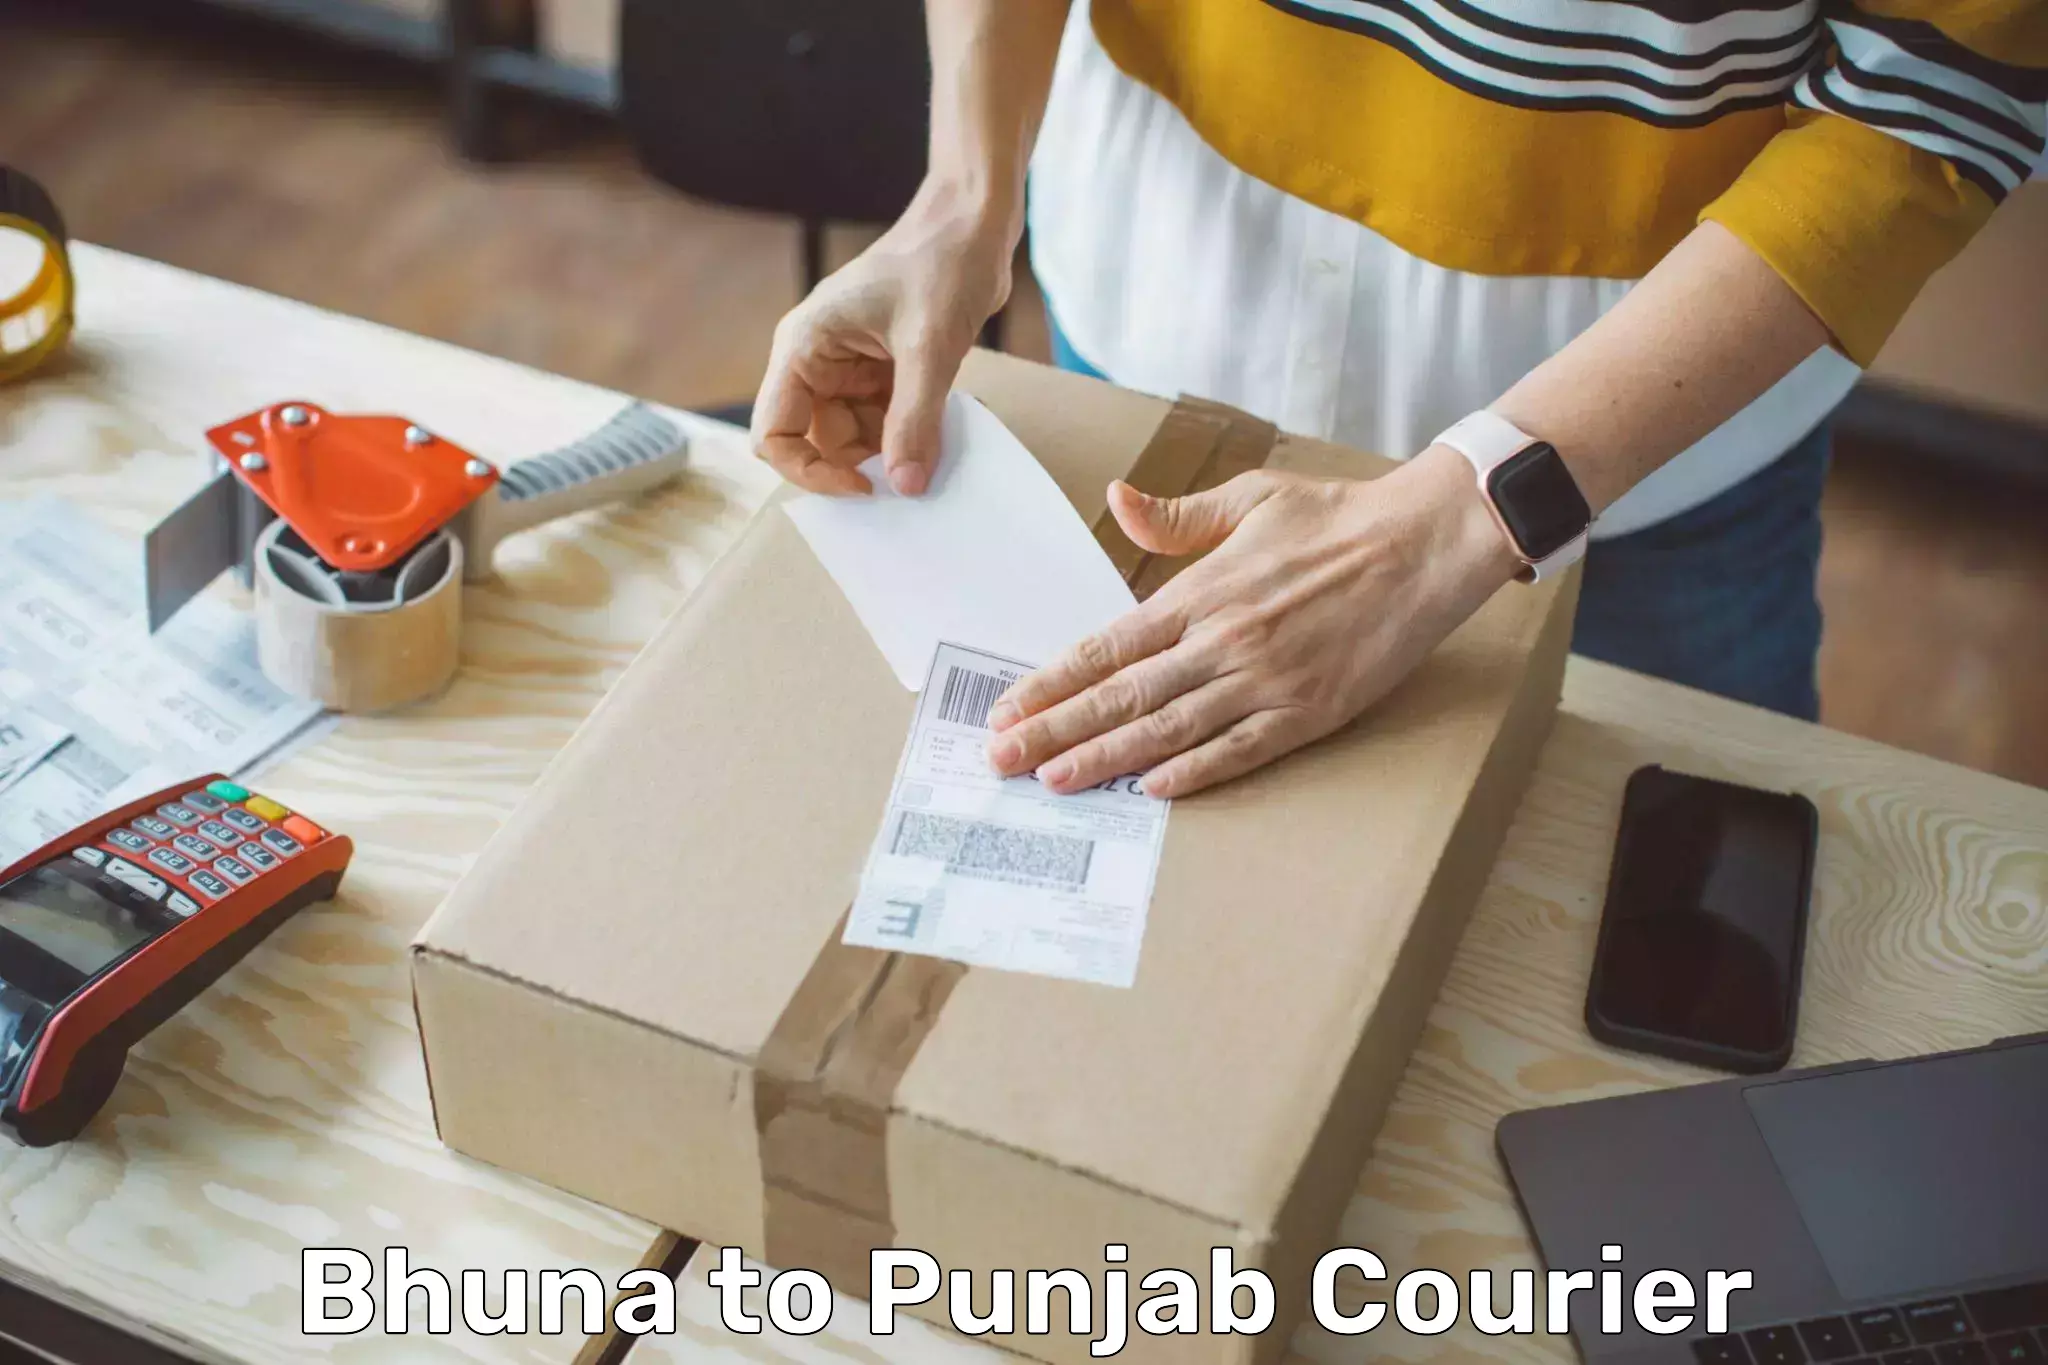 Flexible delivery schedules Bhuna to Punjab